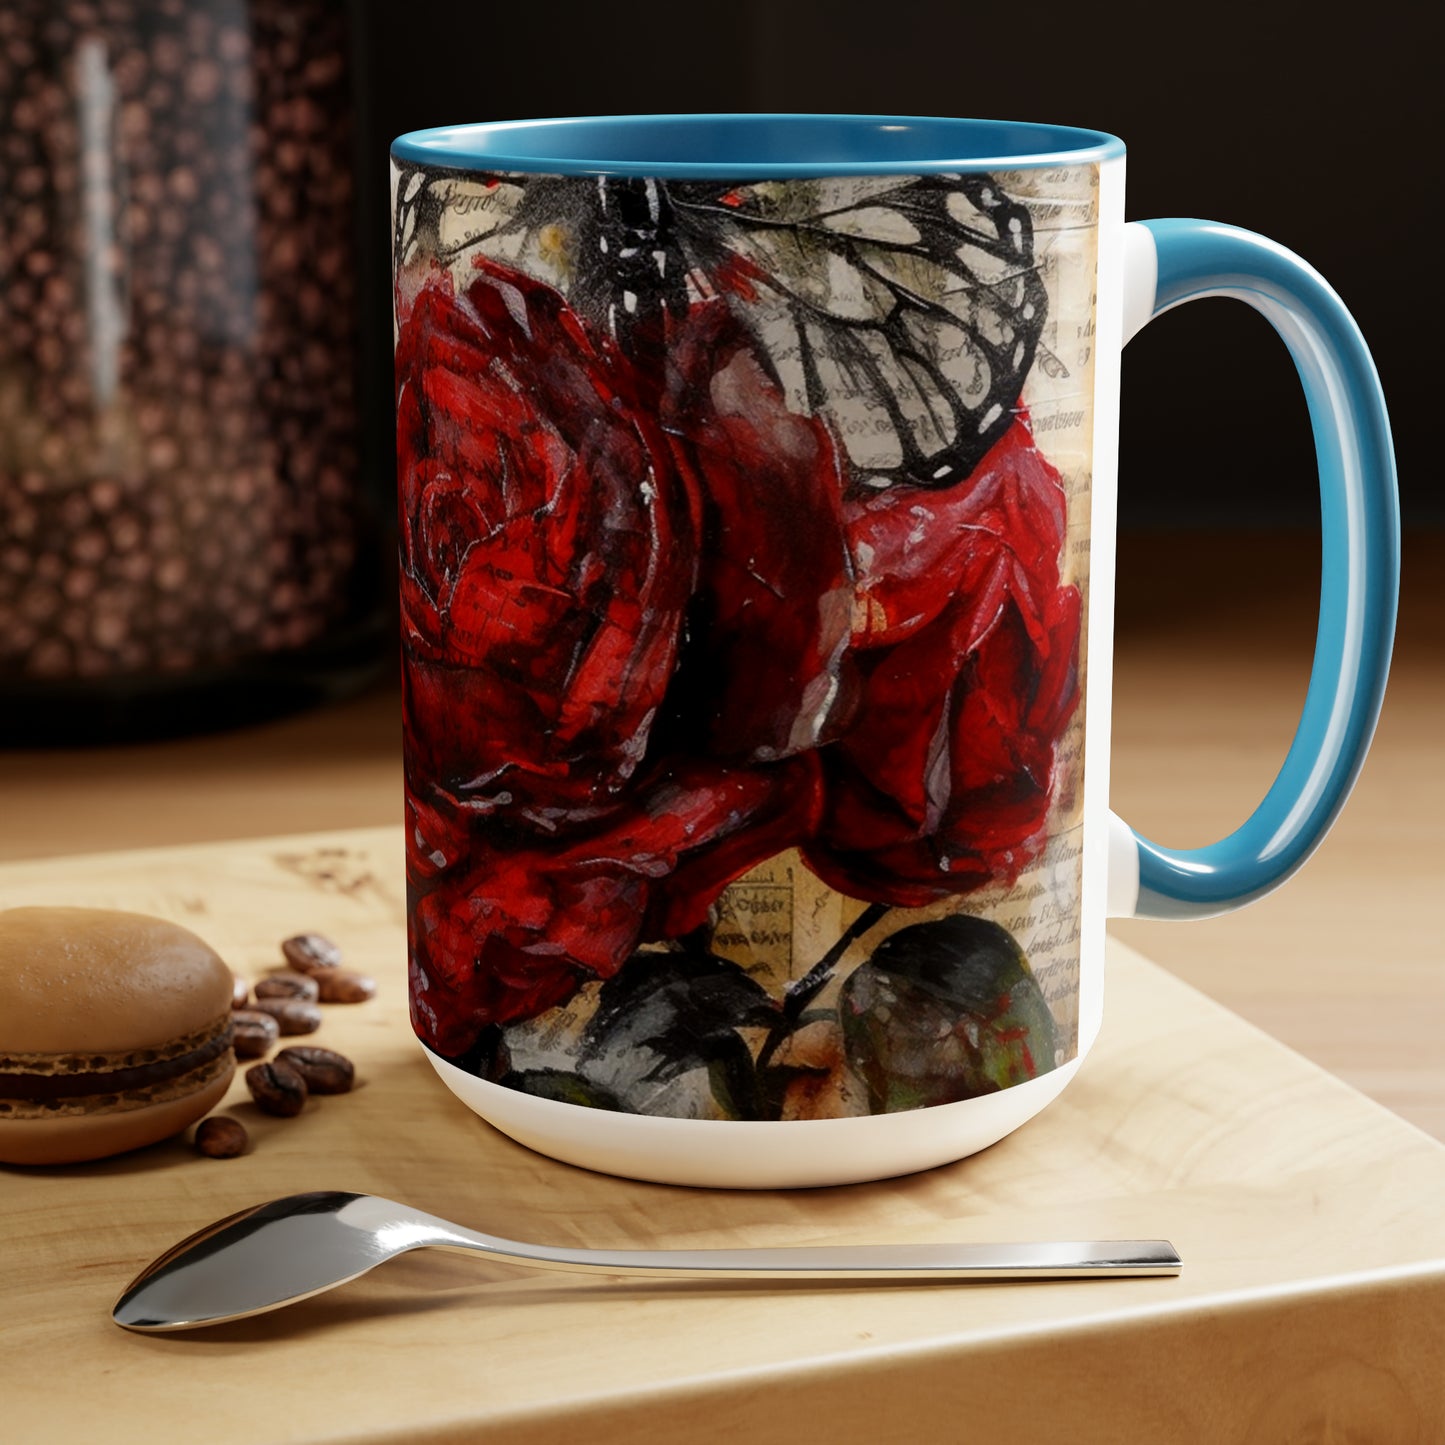 Two-Tone Coffee Mugs, 15oz, Red Rose with Butterfly - blue rim